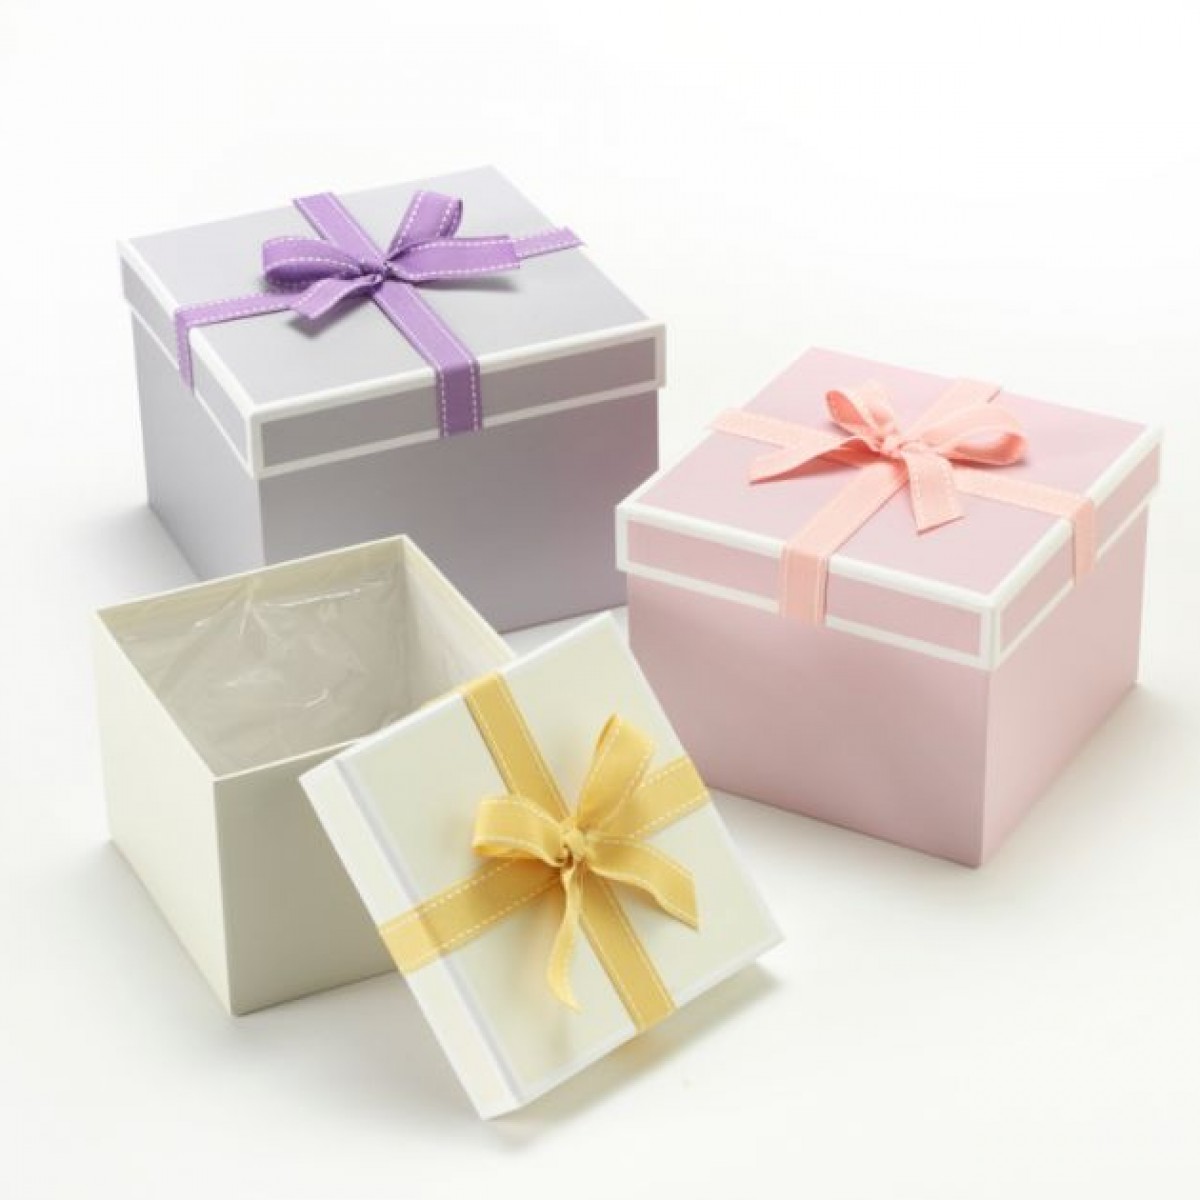 5025 Grey/Pink/Cream Square Paper Gift Box With Bow Lined - Set of 3